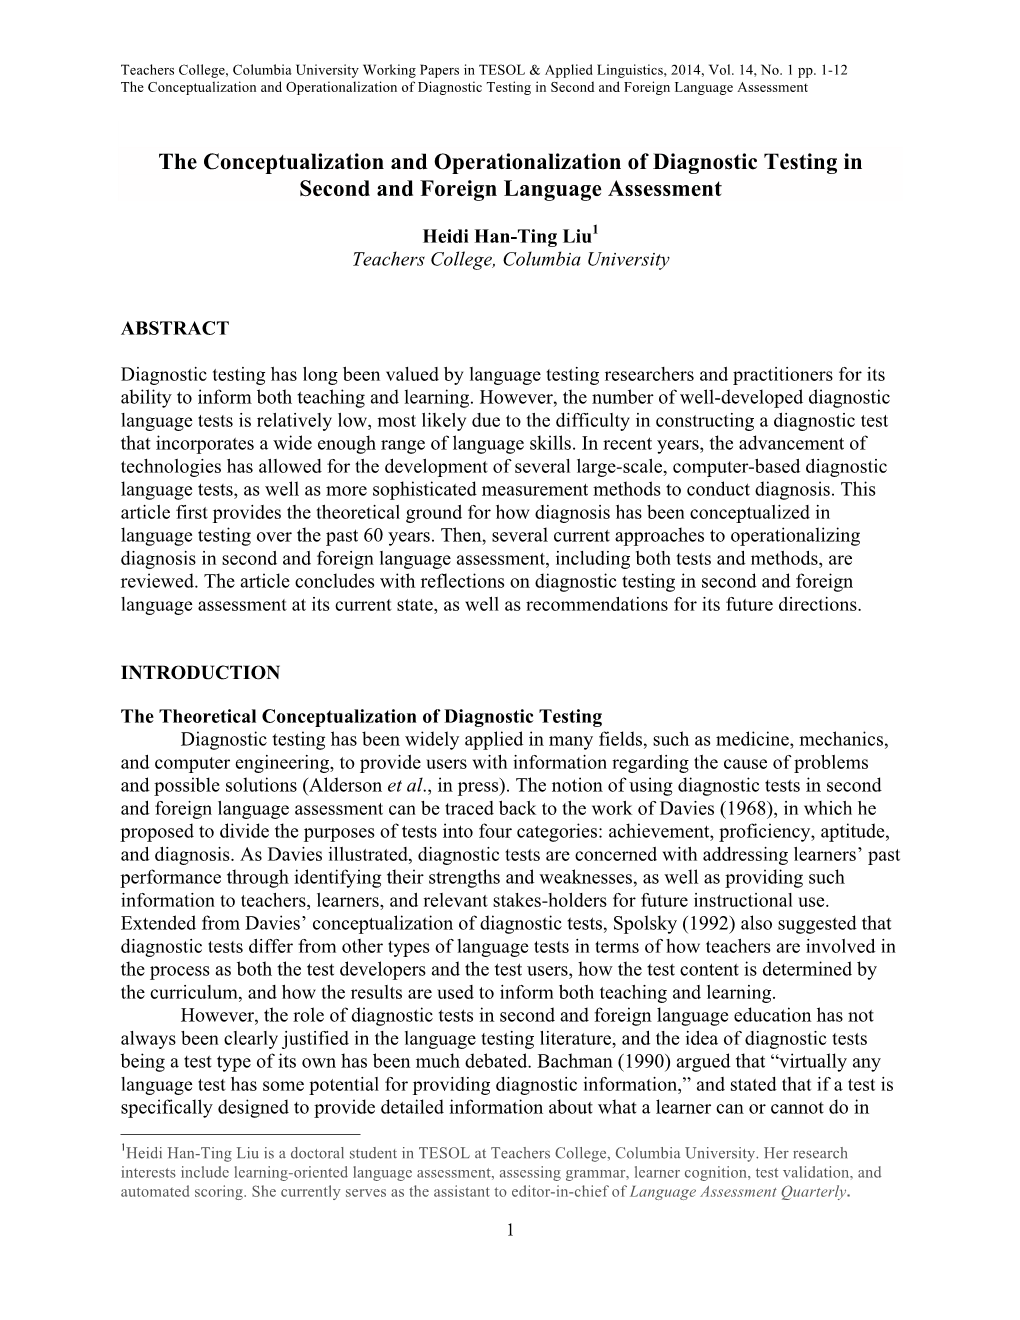 The Conceptualization and Operationalization of Diagnostic Testing in Second and Foreign Language Assessment